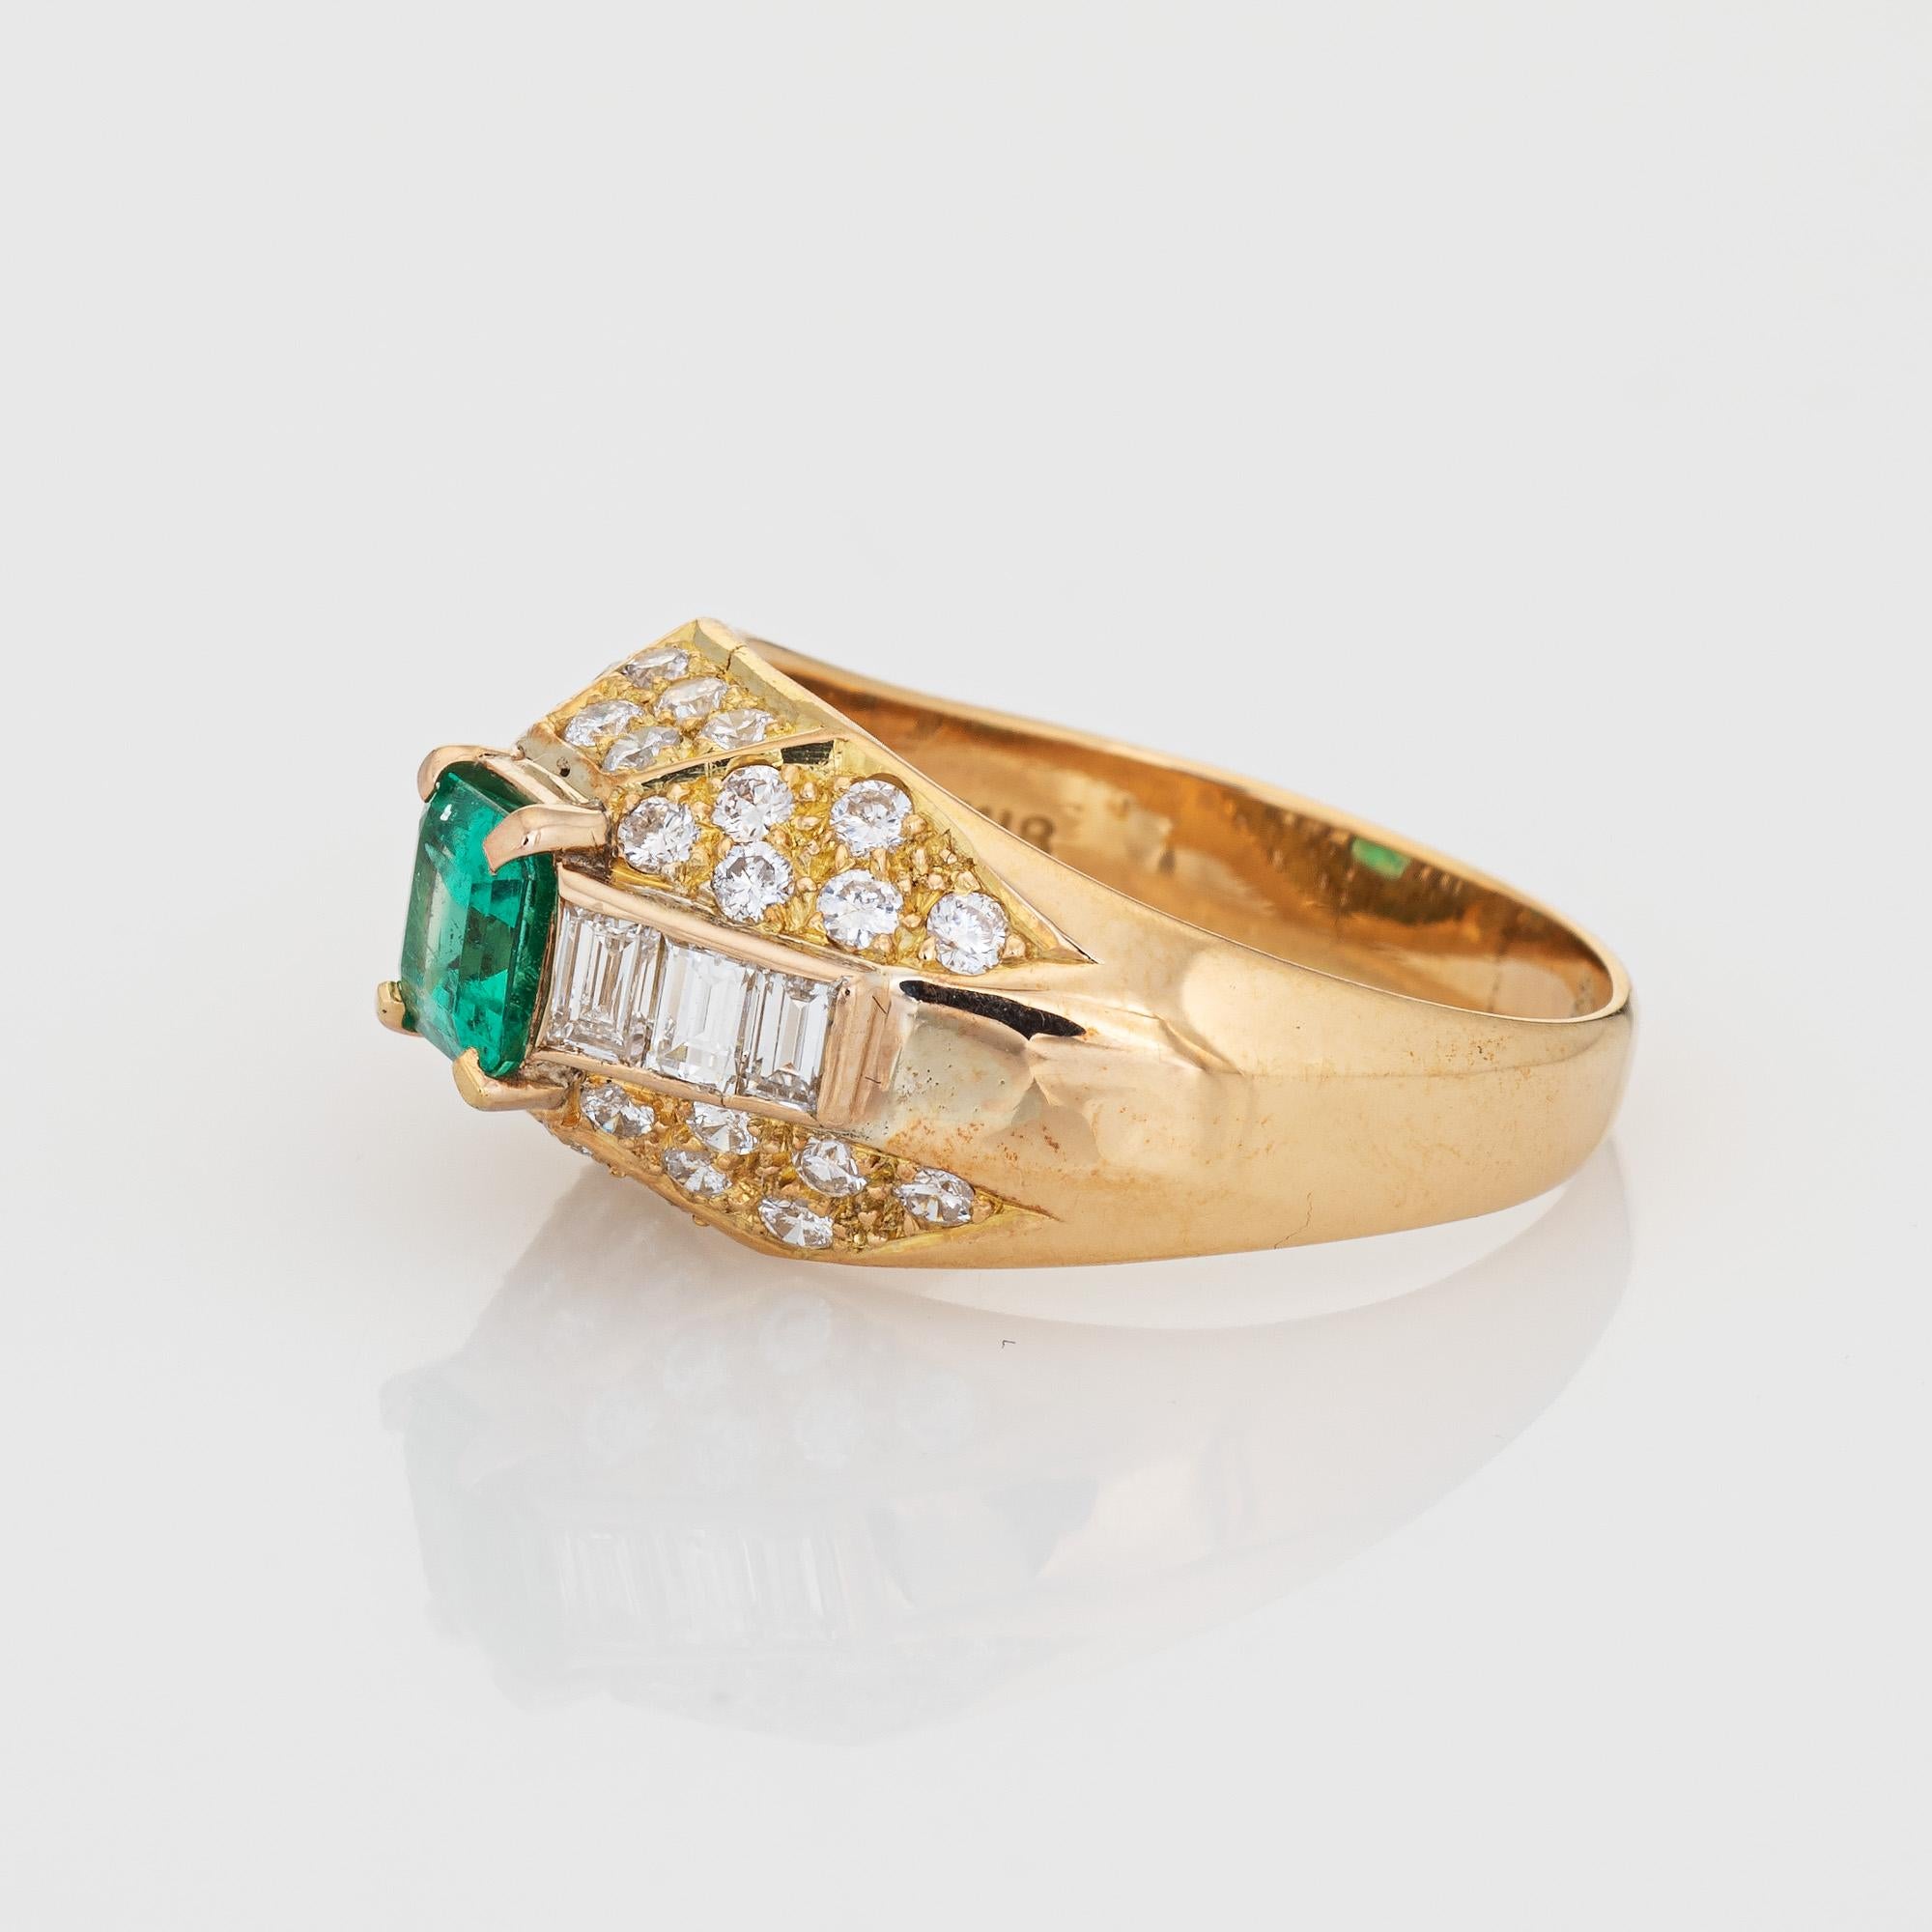 Emerald Cut Emerald Diamond Ring Vintage 18k Yellow Gold Dome Gemstone Engagement For Sale